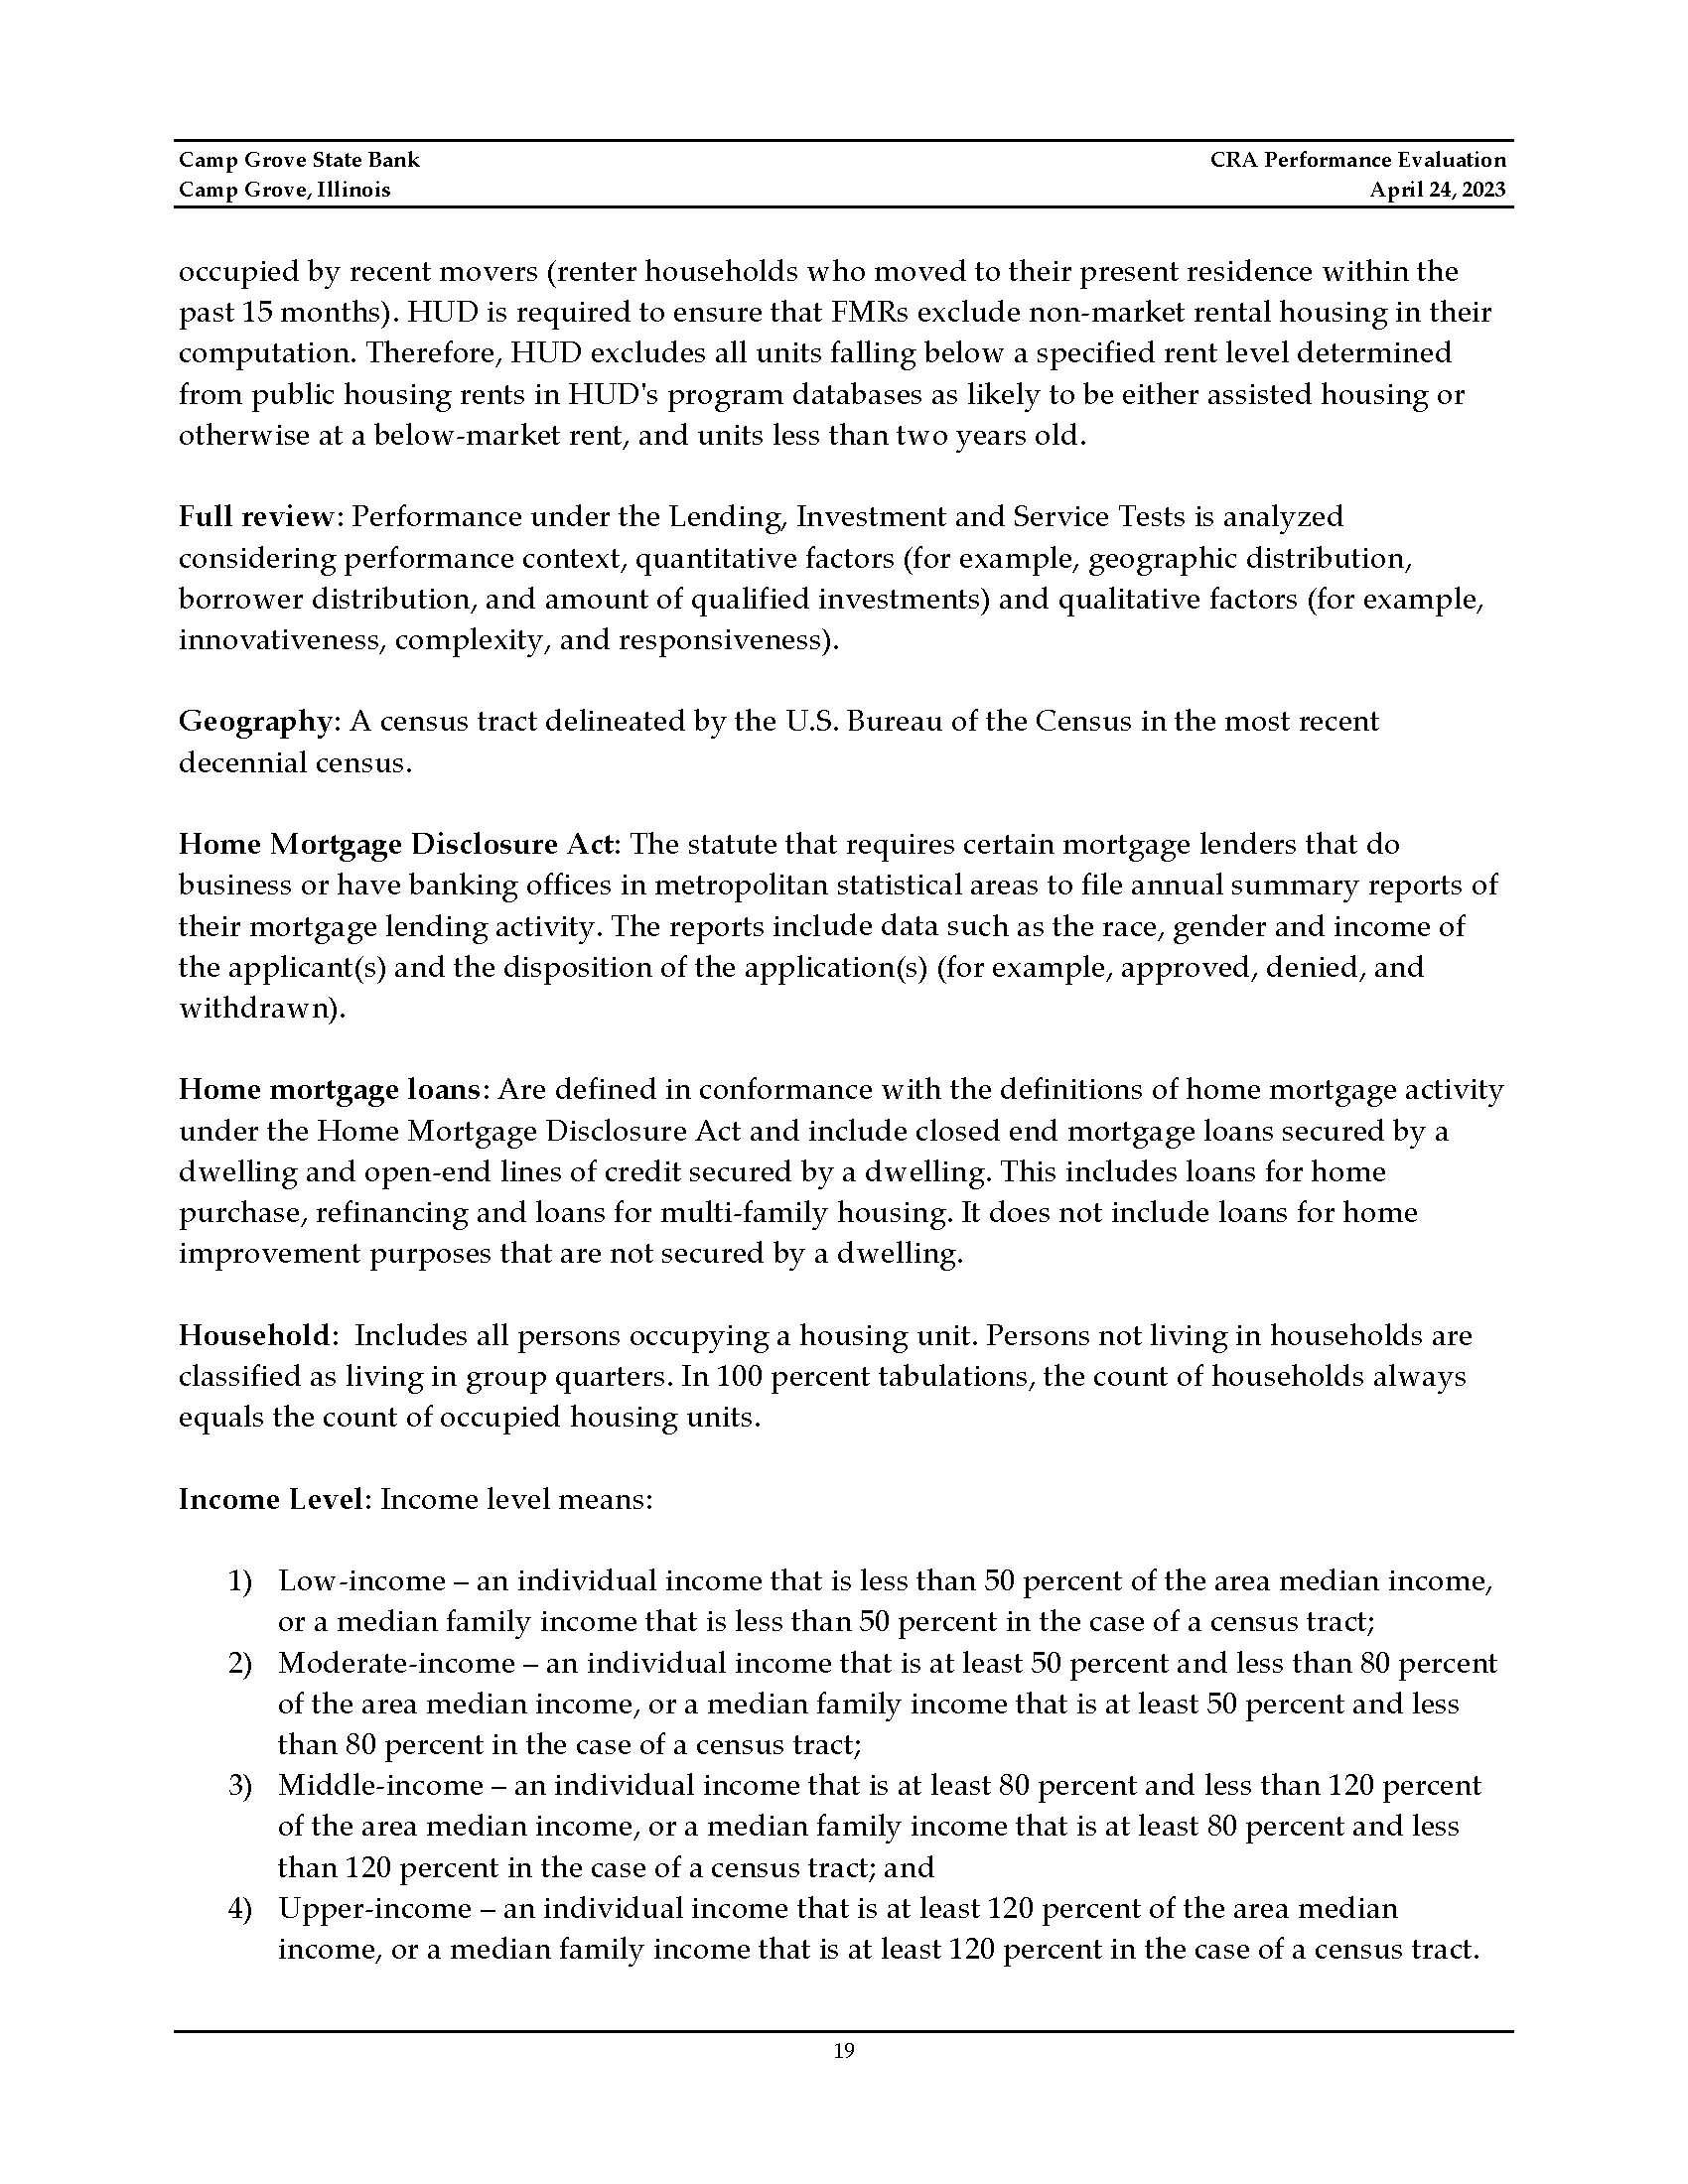 Community Reinvestment Act Page 22